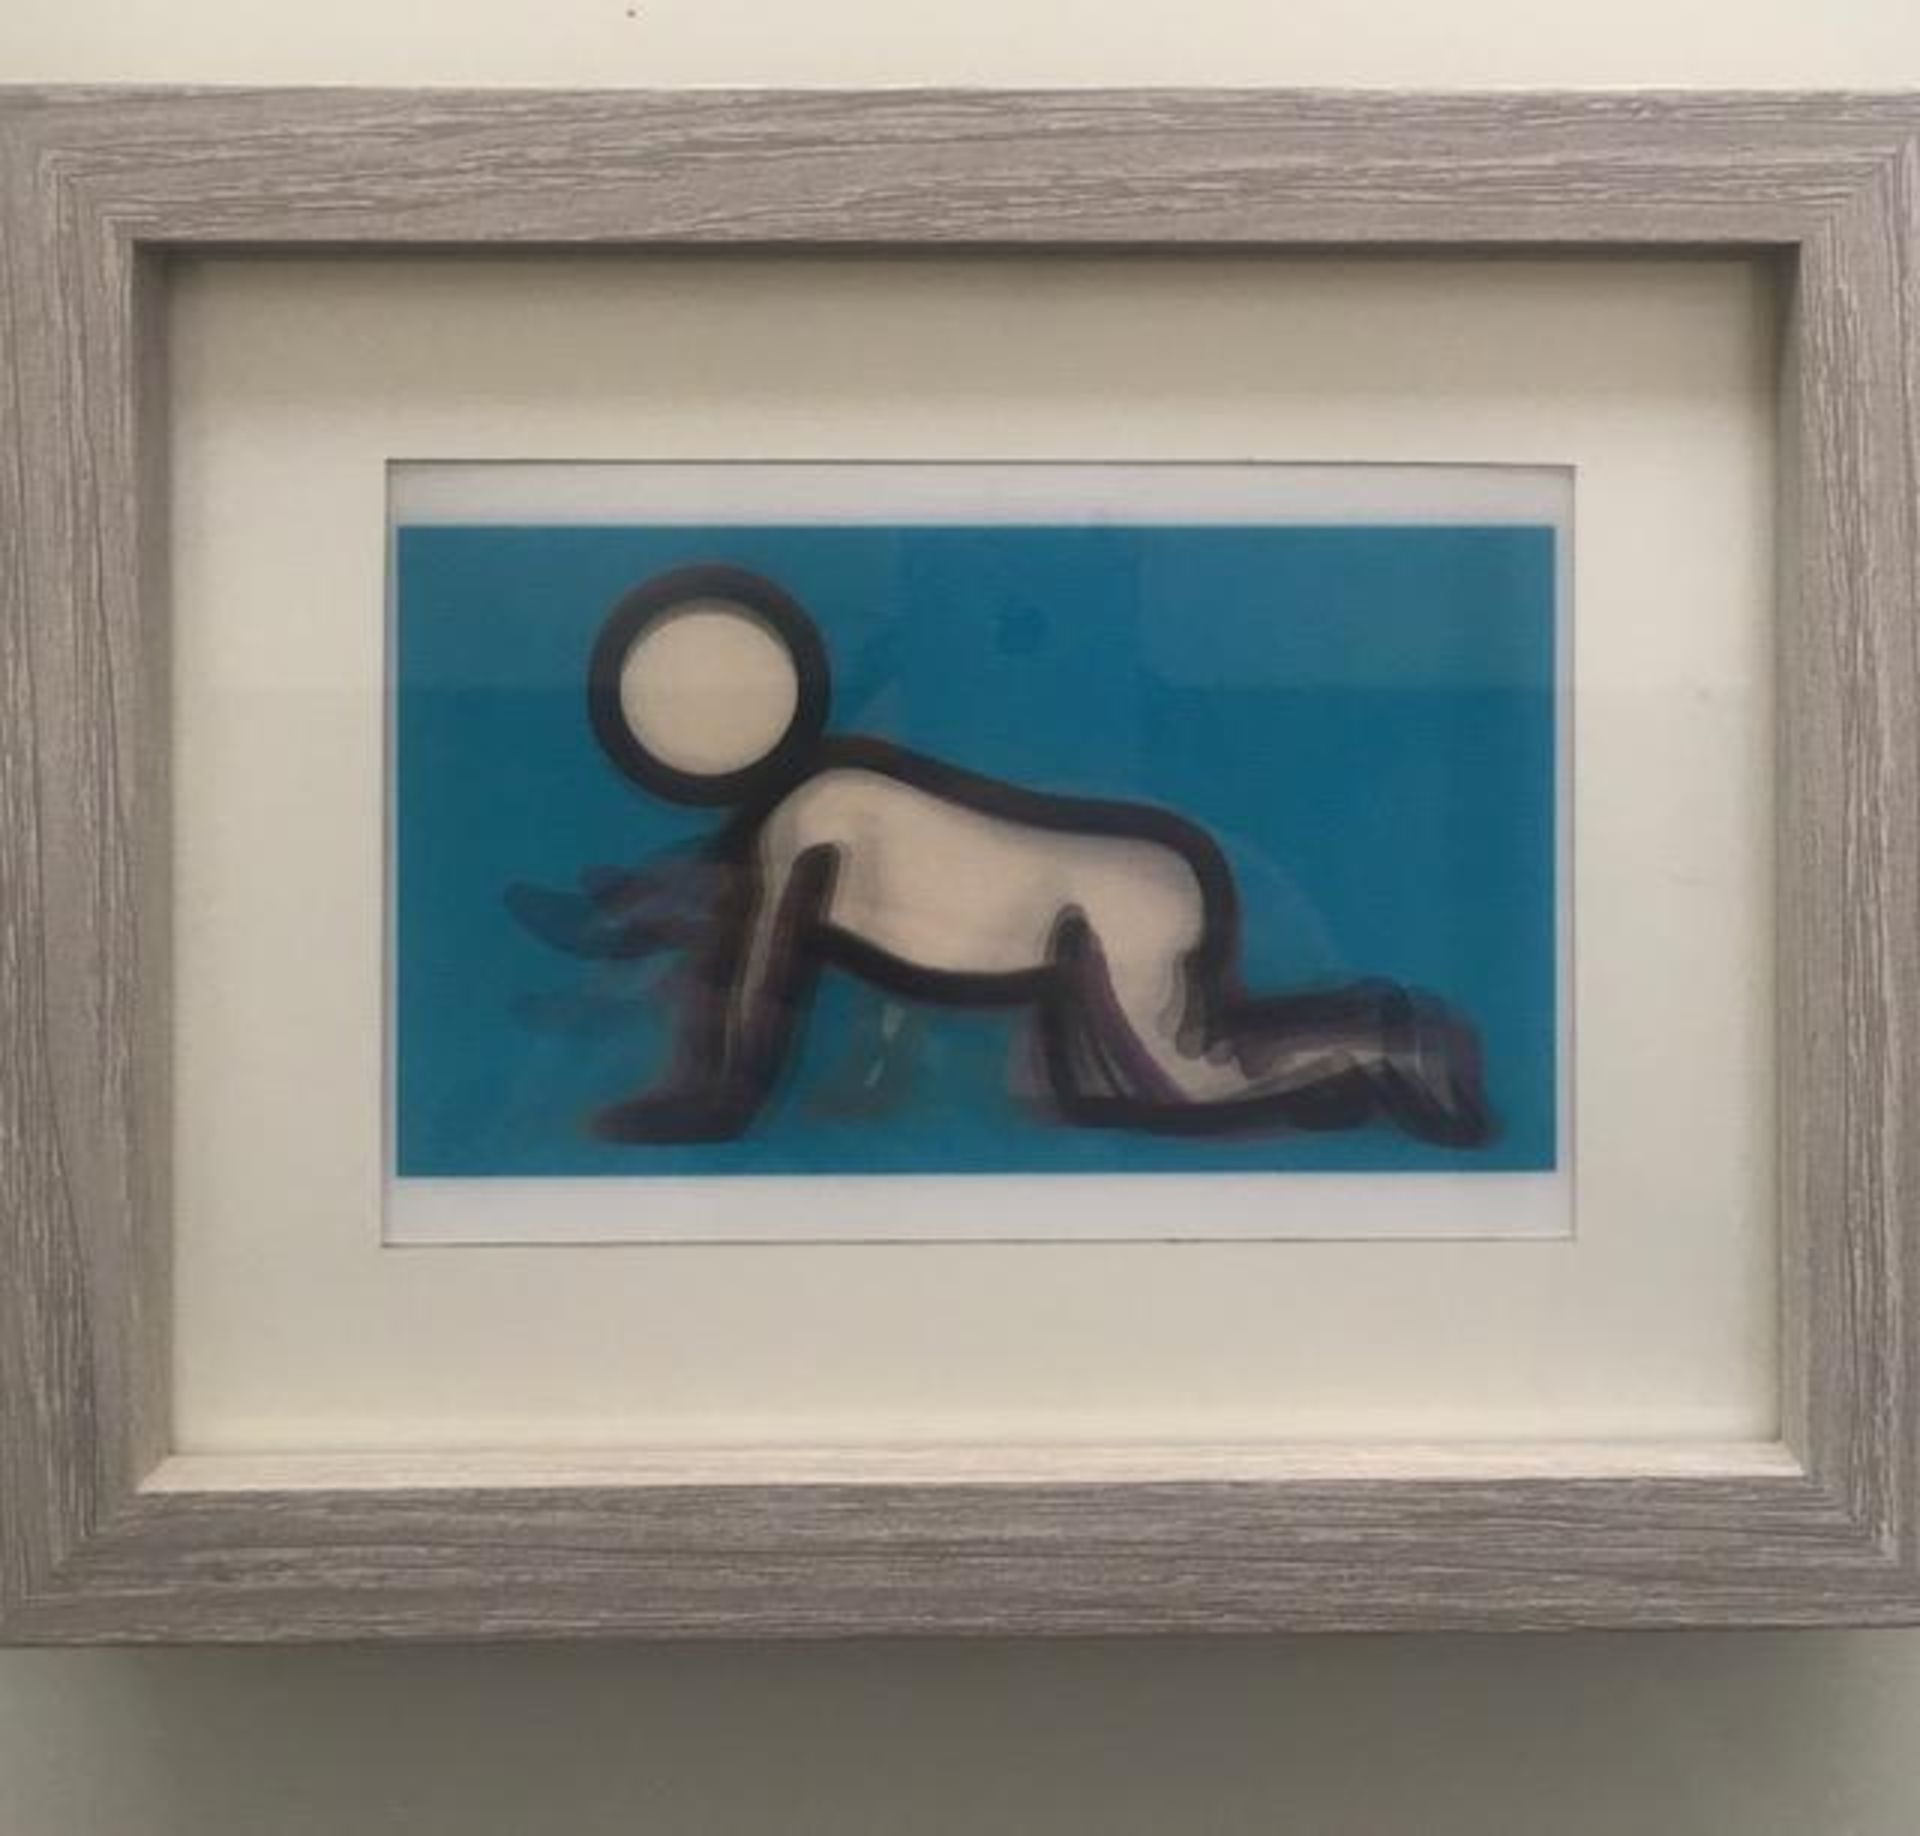 Julian Opie (1958-) 3D Lenticular Moving Image, in Colours ‘DINO CRAWLING’ Framed, 2012 - Image 6 of 13